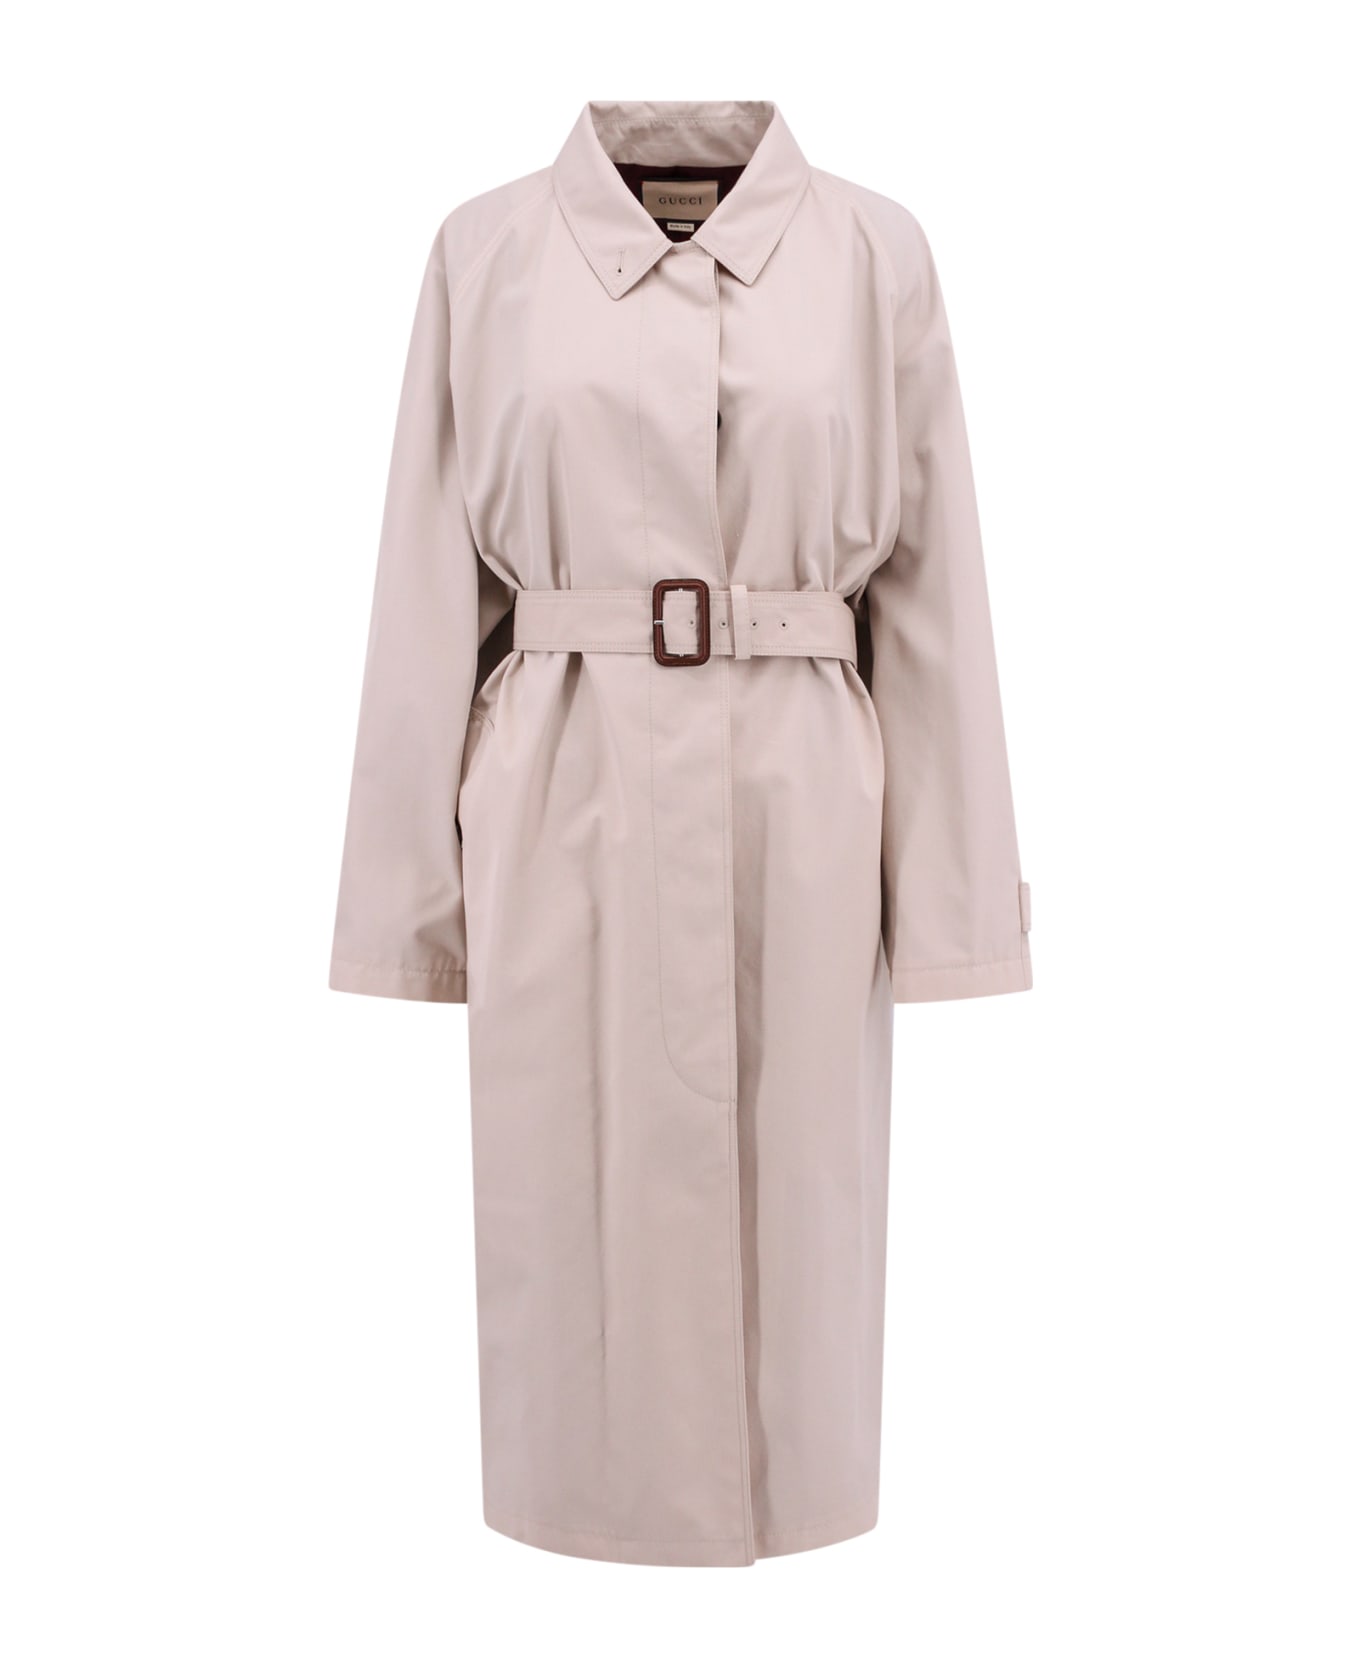 Gucci Trench - White